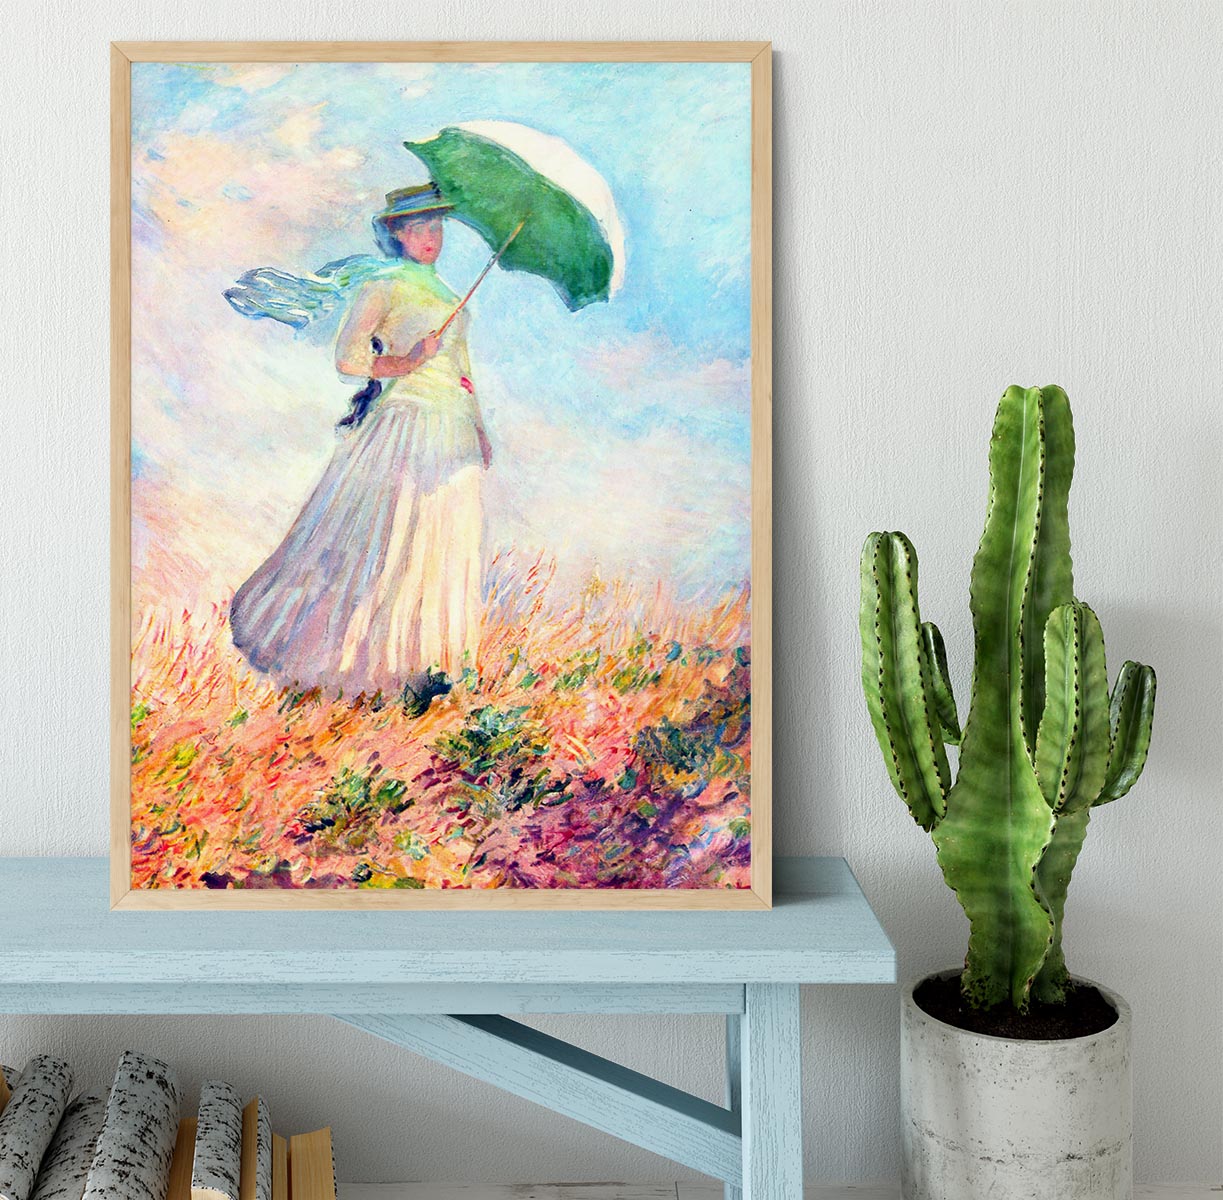 Lady with sunshade study by Monet Framed Print - Canvas Art Rocks - 4